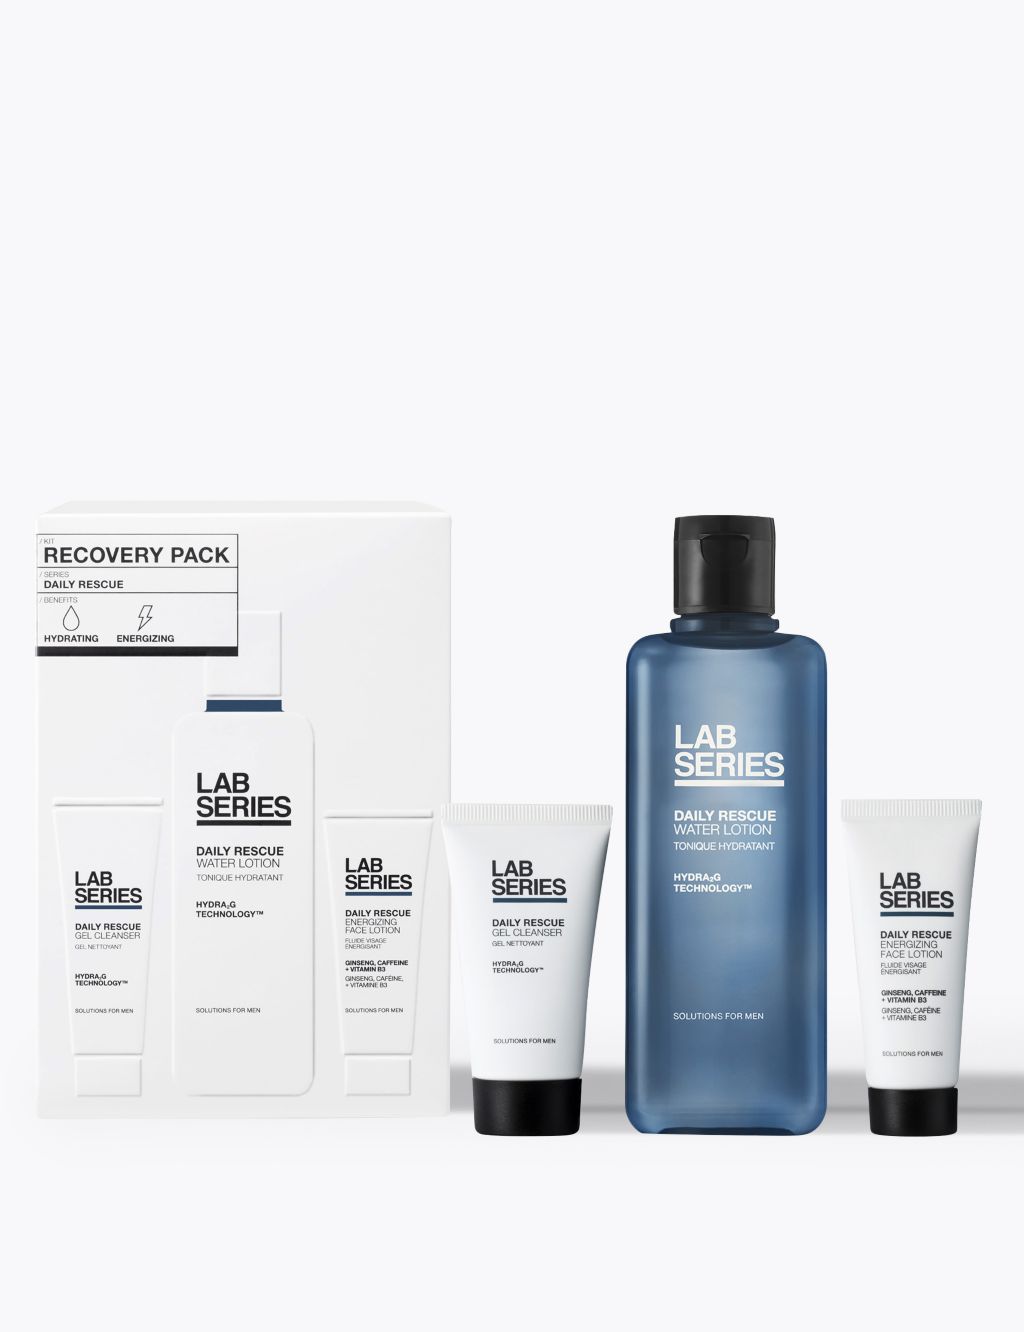 Recovery Pack Daily Rescue Gift Set